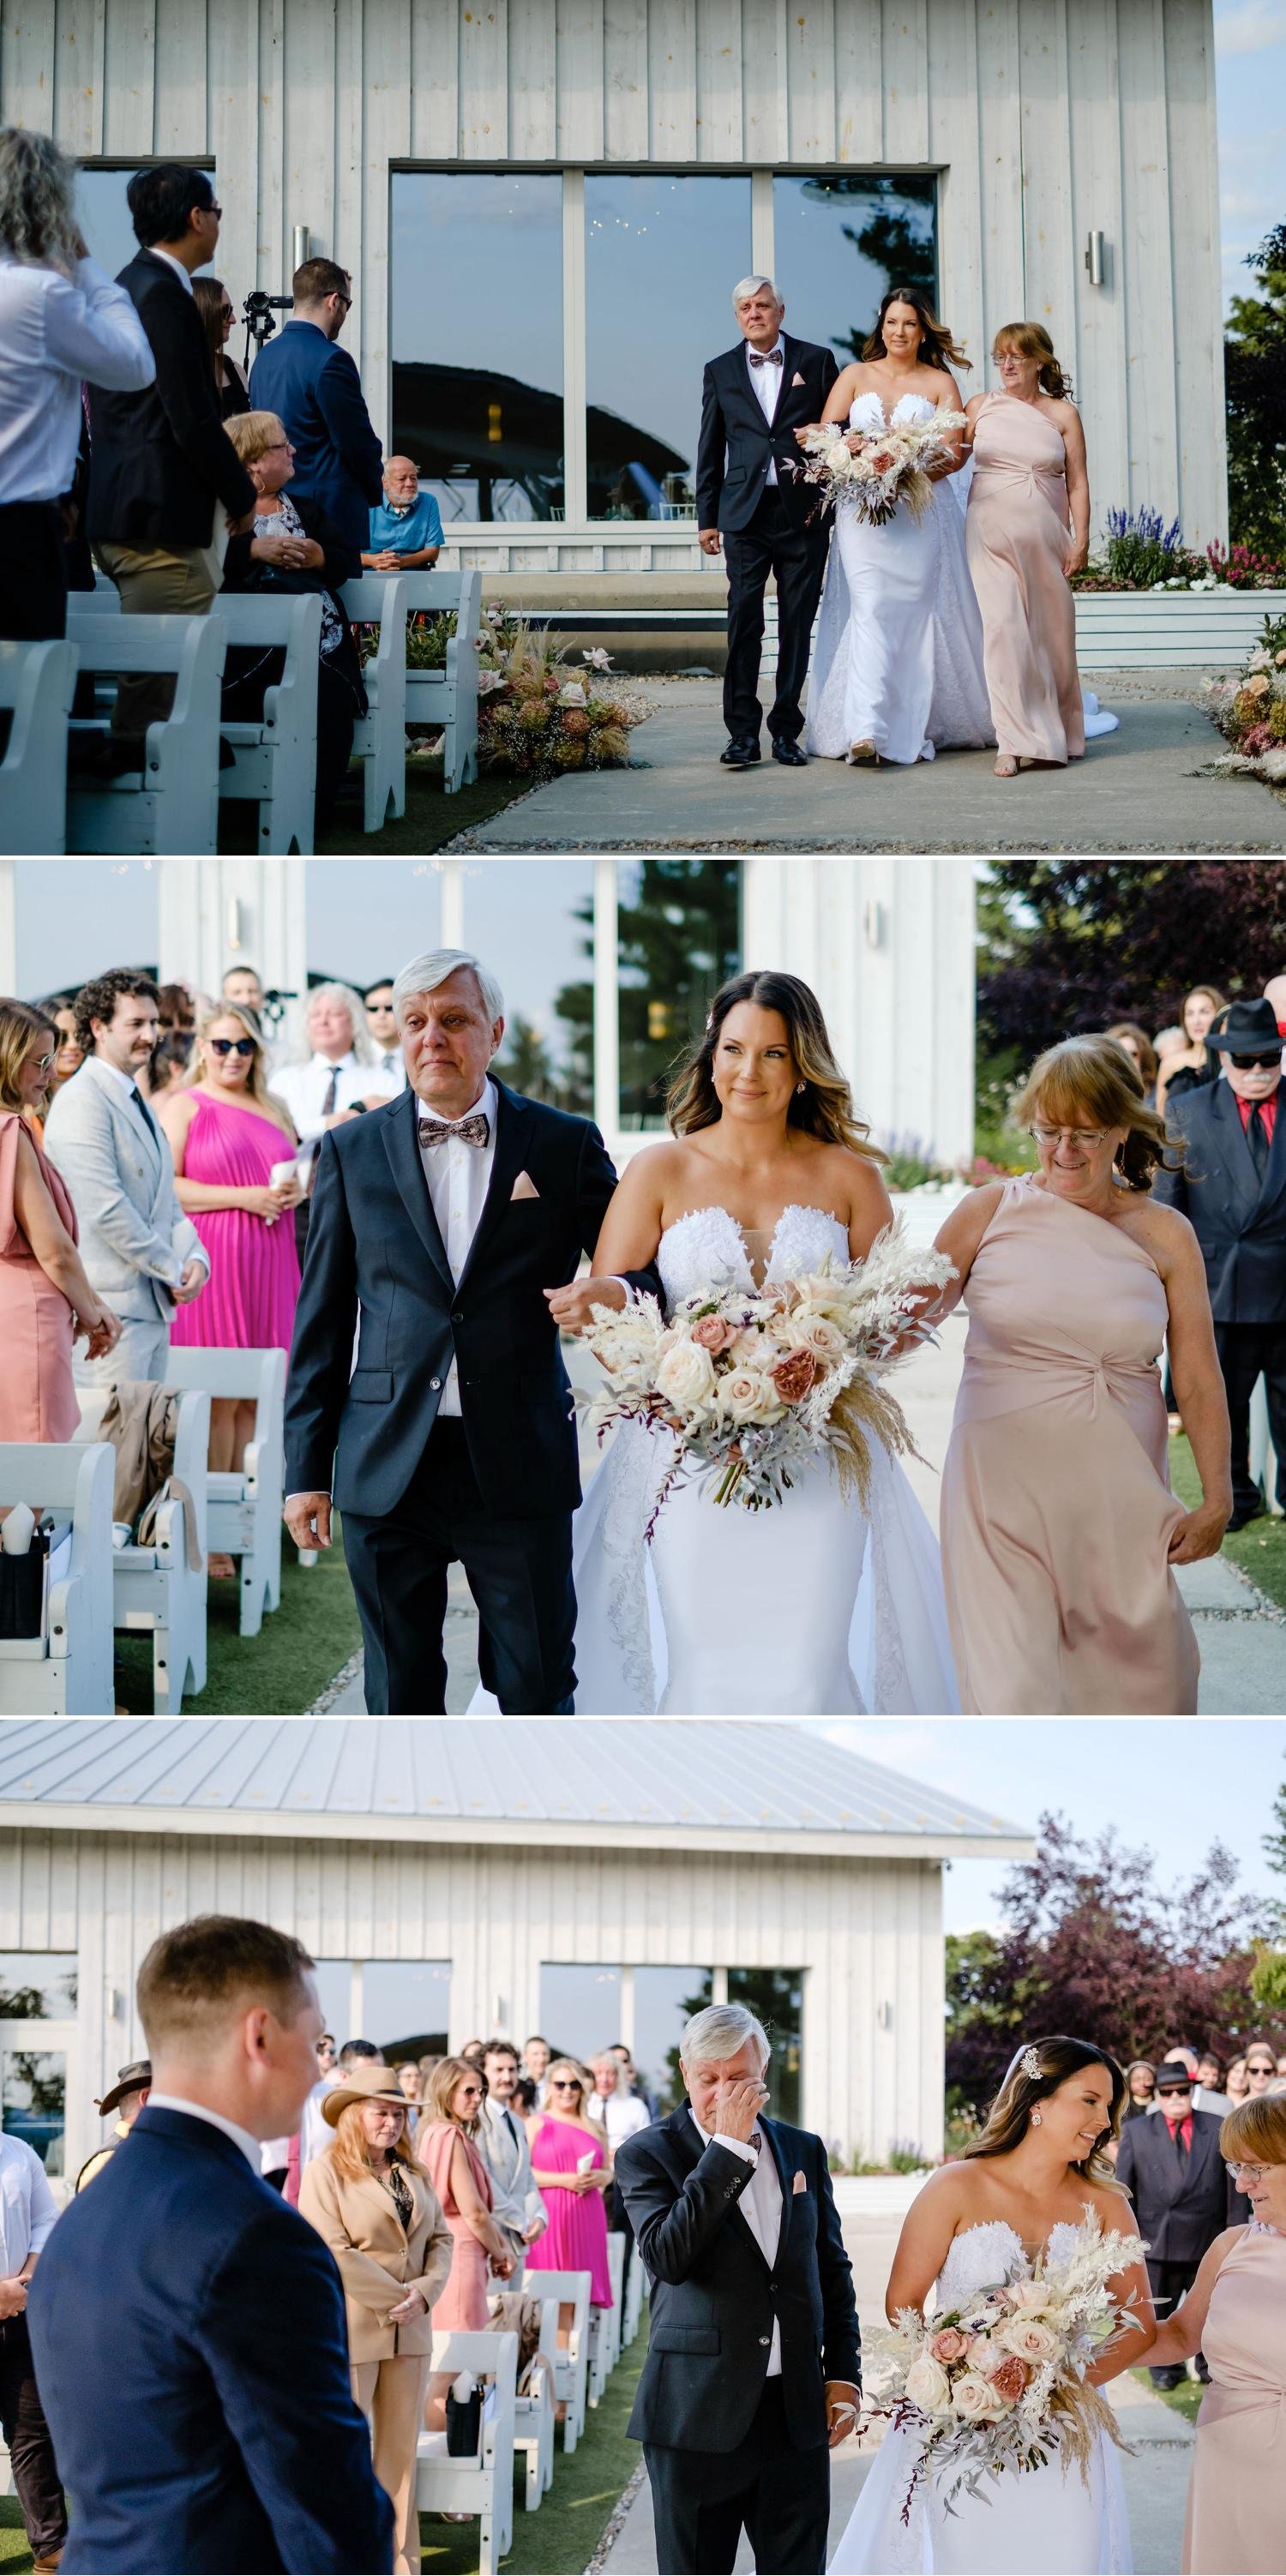 photograph of a bride walking down the aisle at a le belvedere wedding ceremony